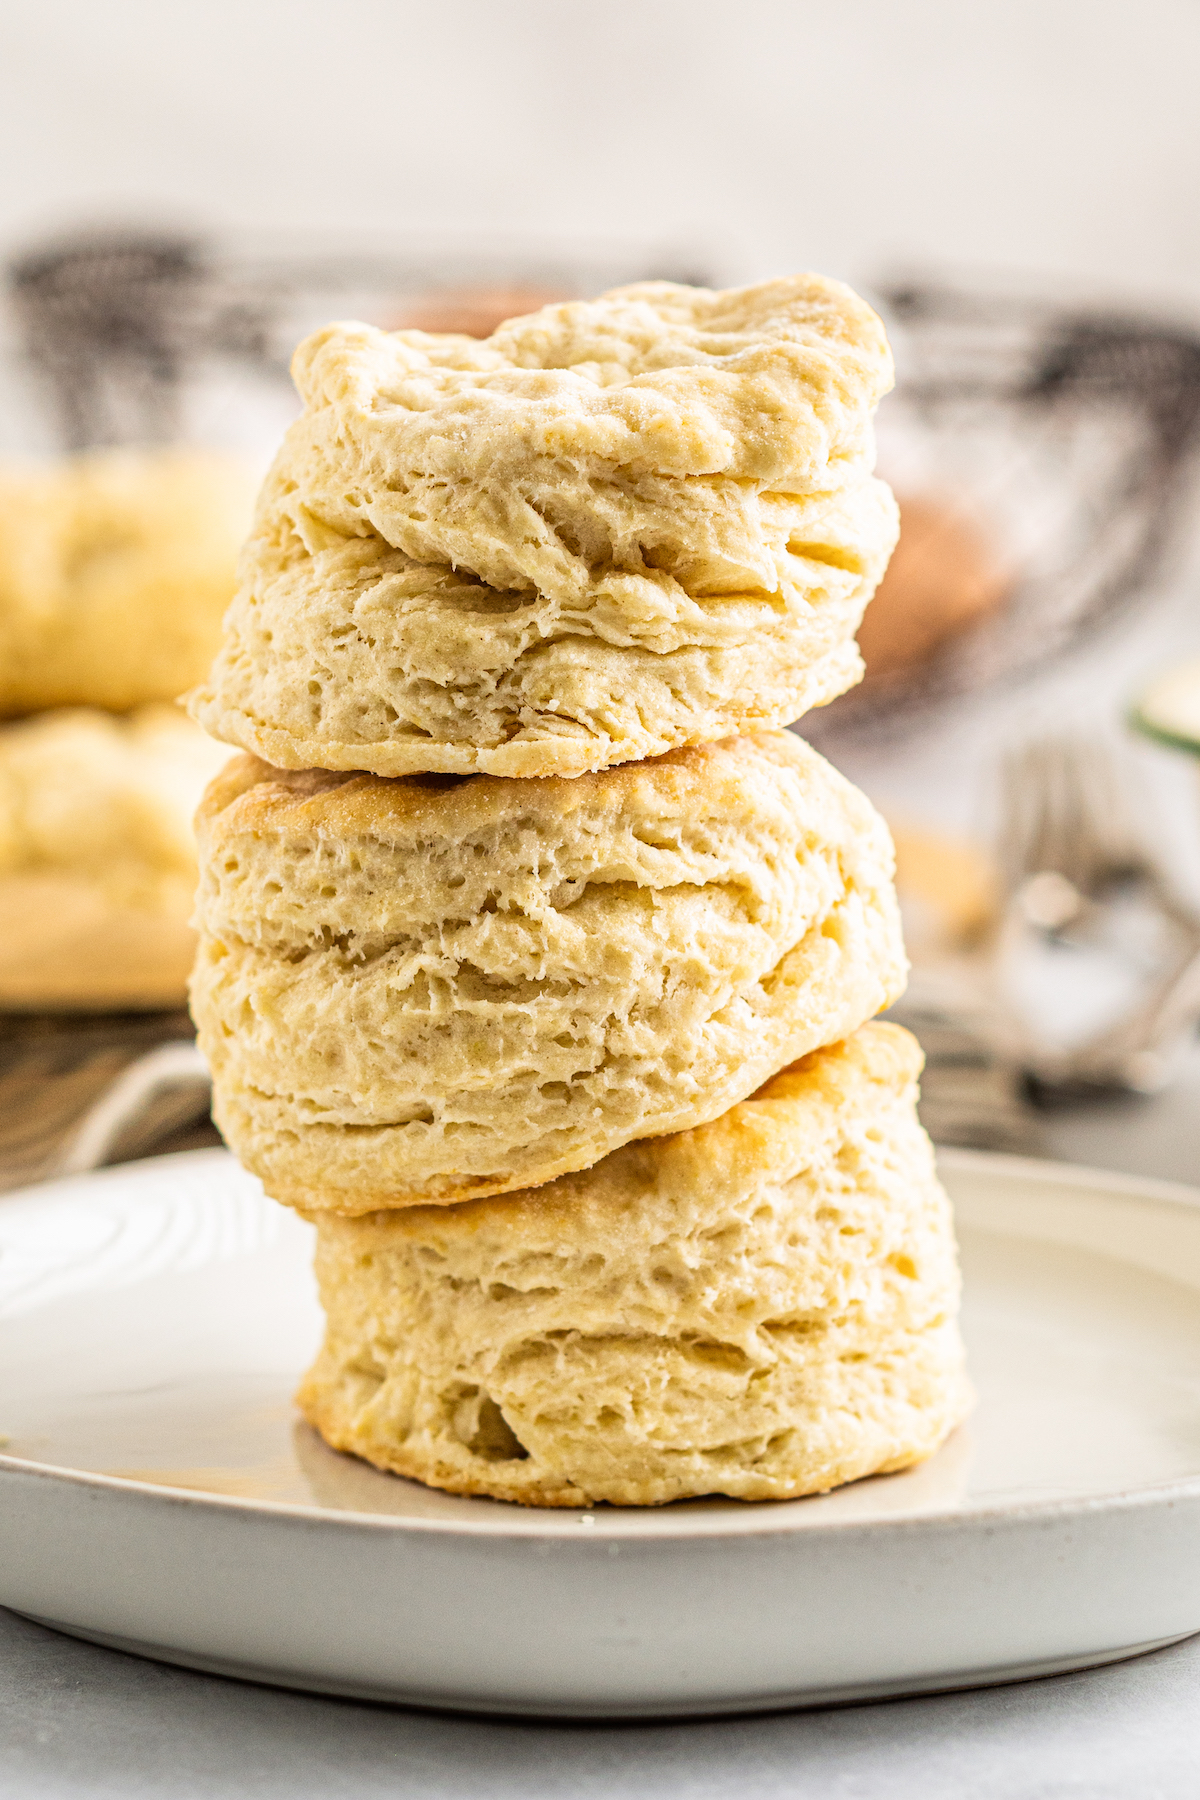 Three tall, flaky homemade biscuits stacked on top of each other.